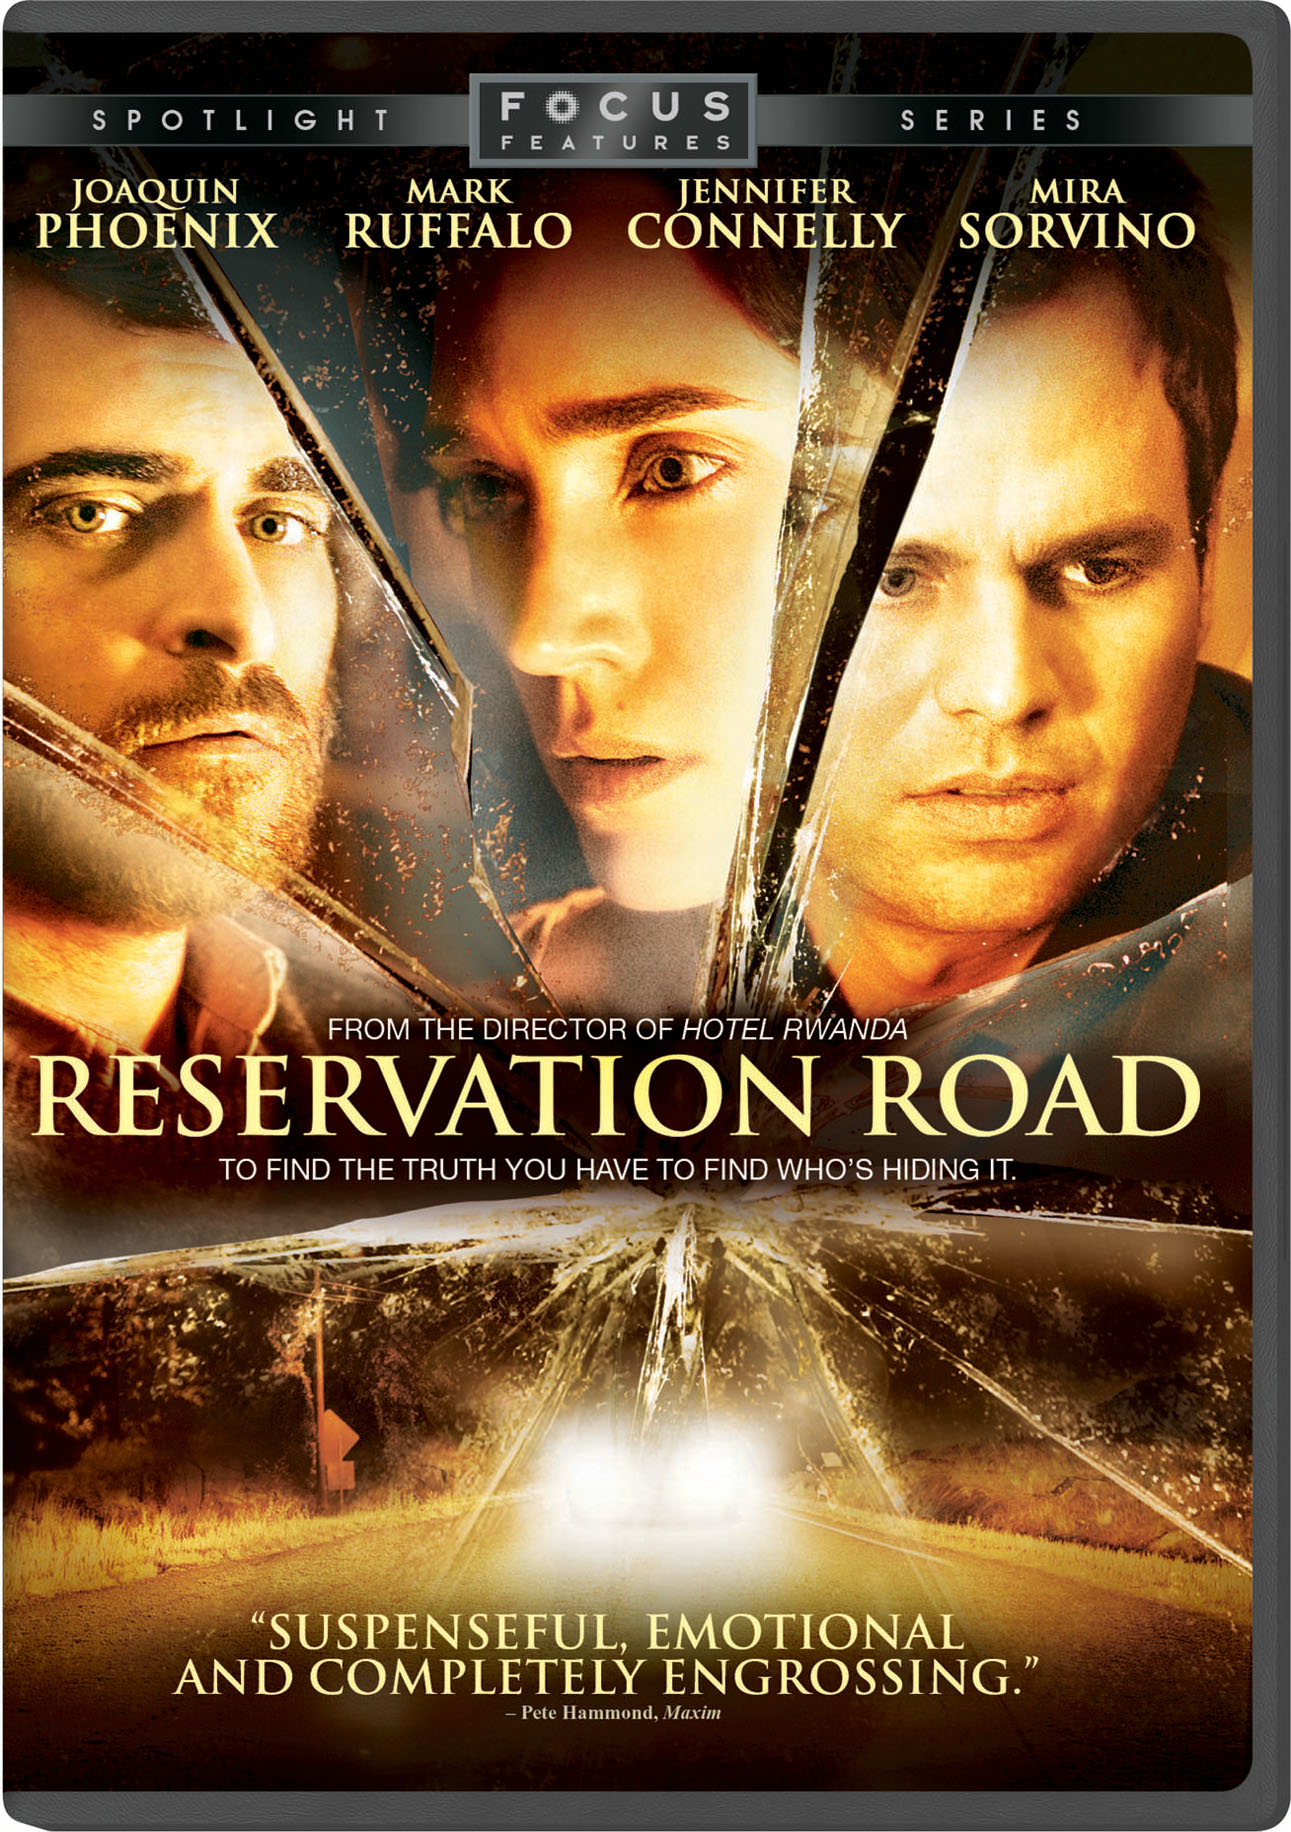 Reservation Road (DVD Widescreen) - DVD [ 2007 ]  - Drama Movies On DVD - Movies On GRUV